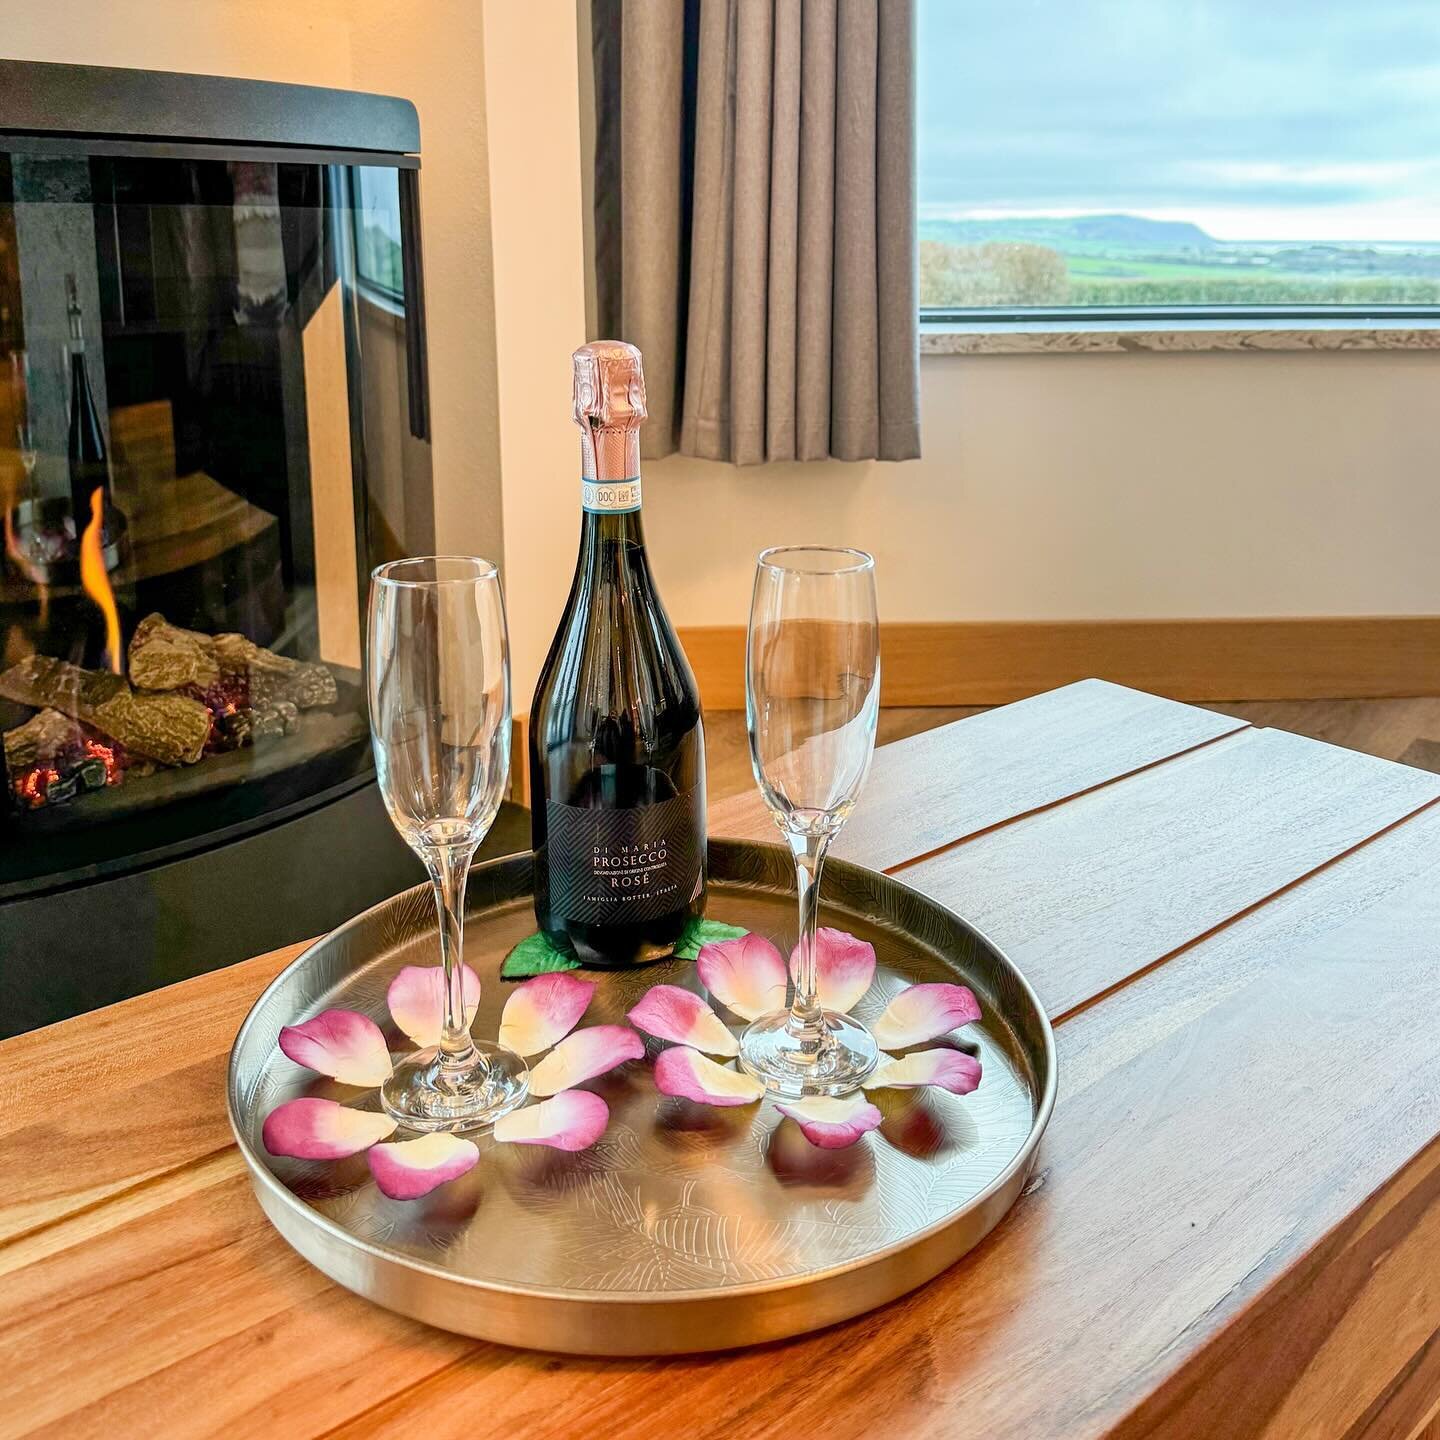 There&rsquo;s still time to book for your Valentine&rsquo;s Day celebrations, whether it&rsquo;s a last minute trip or perhaps a stay later into the month you can take advantage of our &ldquo;Month of Love&rdquo; offer. 

Our romance package includes